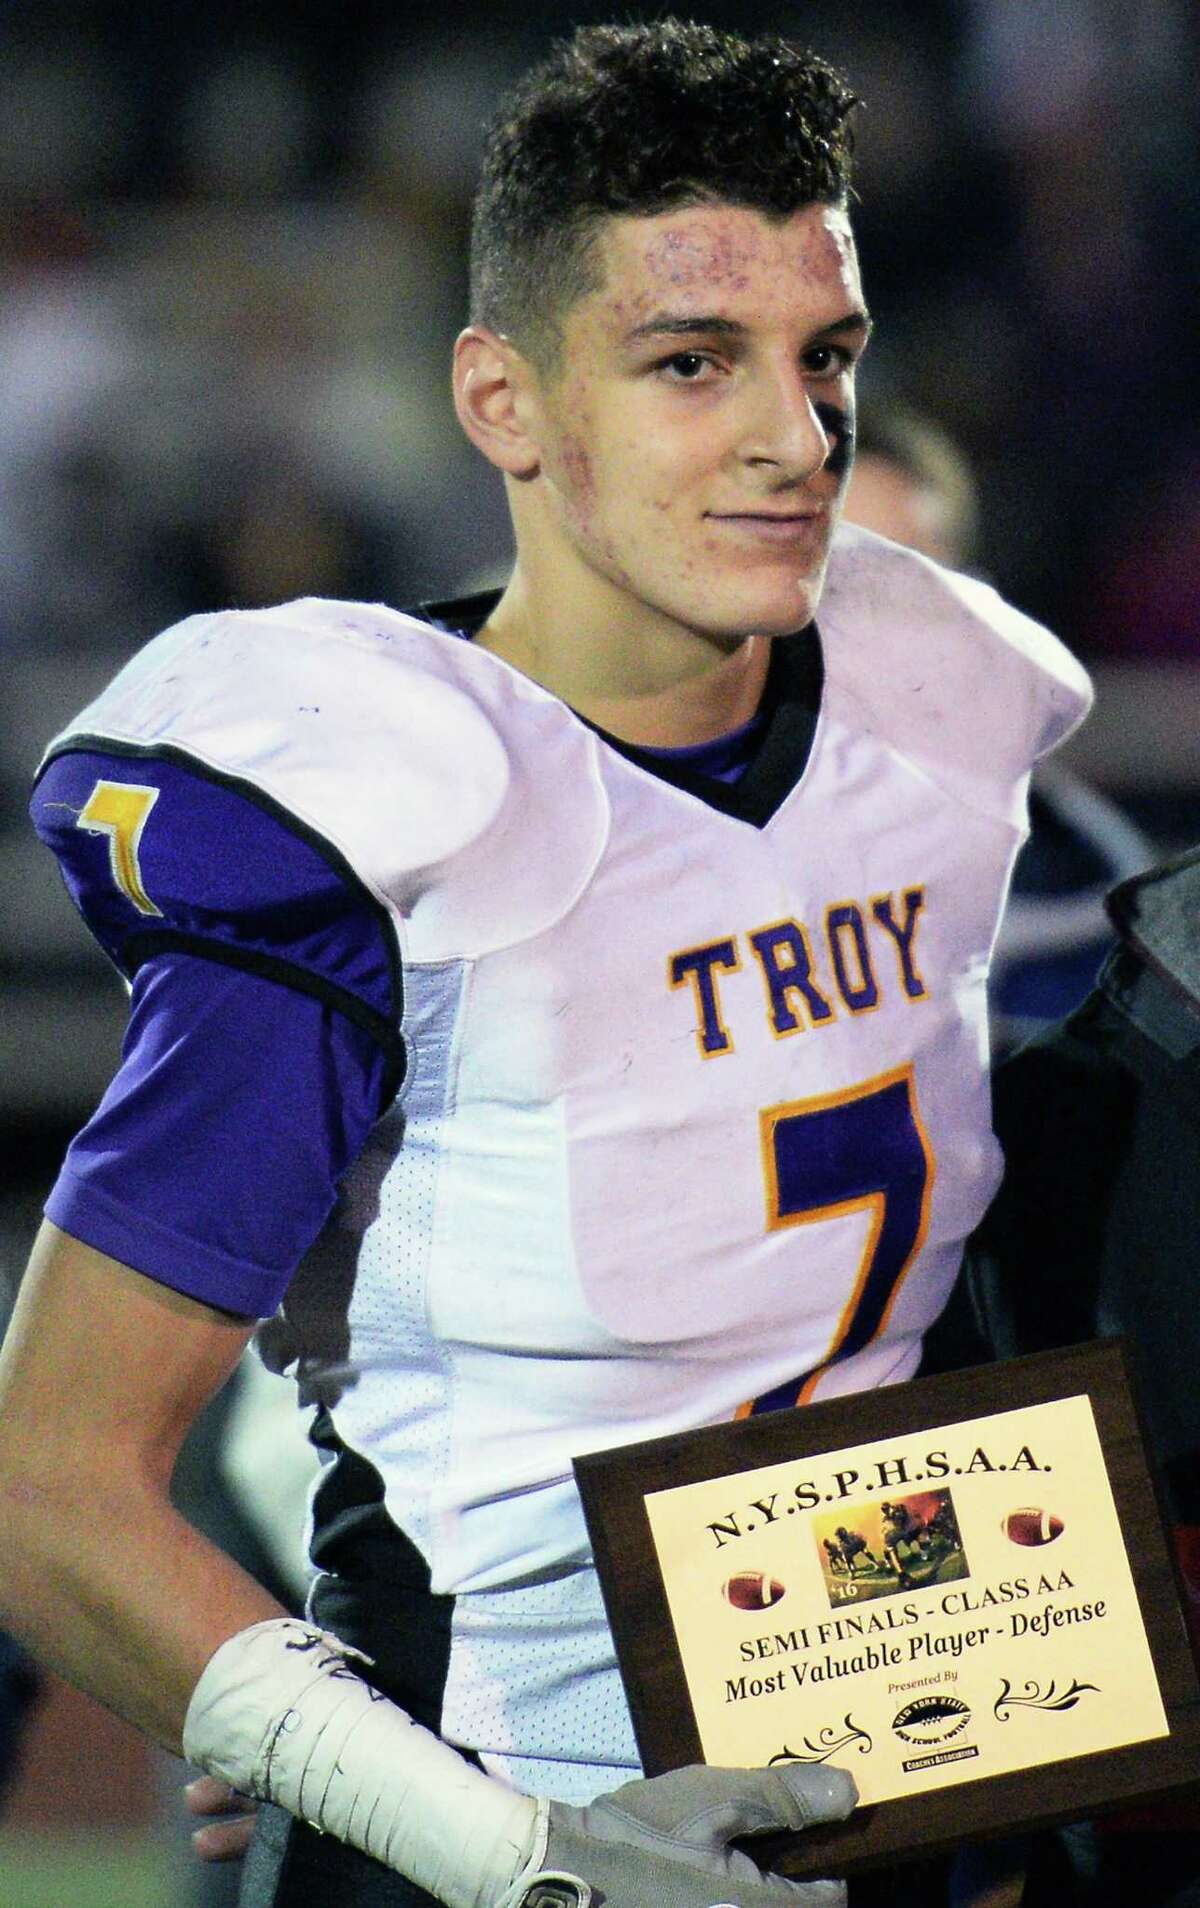 Troy #7 Joe Casale poses for photos after winning the most valuable defensive player after their win in the Class AA state semifinal game against New Rochelle at Dietz Stadium Saturday Nov. 19, 2016 in Kingston, NY. (John Carl D'Annibale / Times Union)